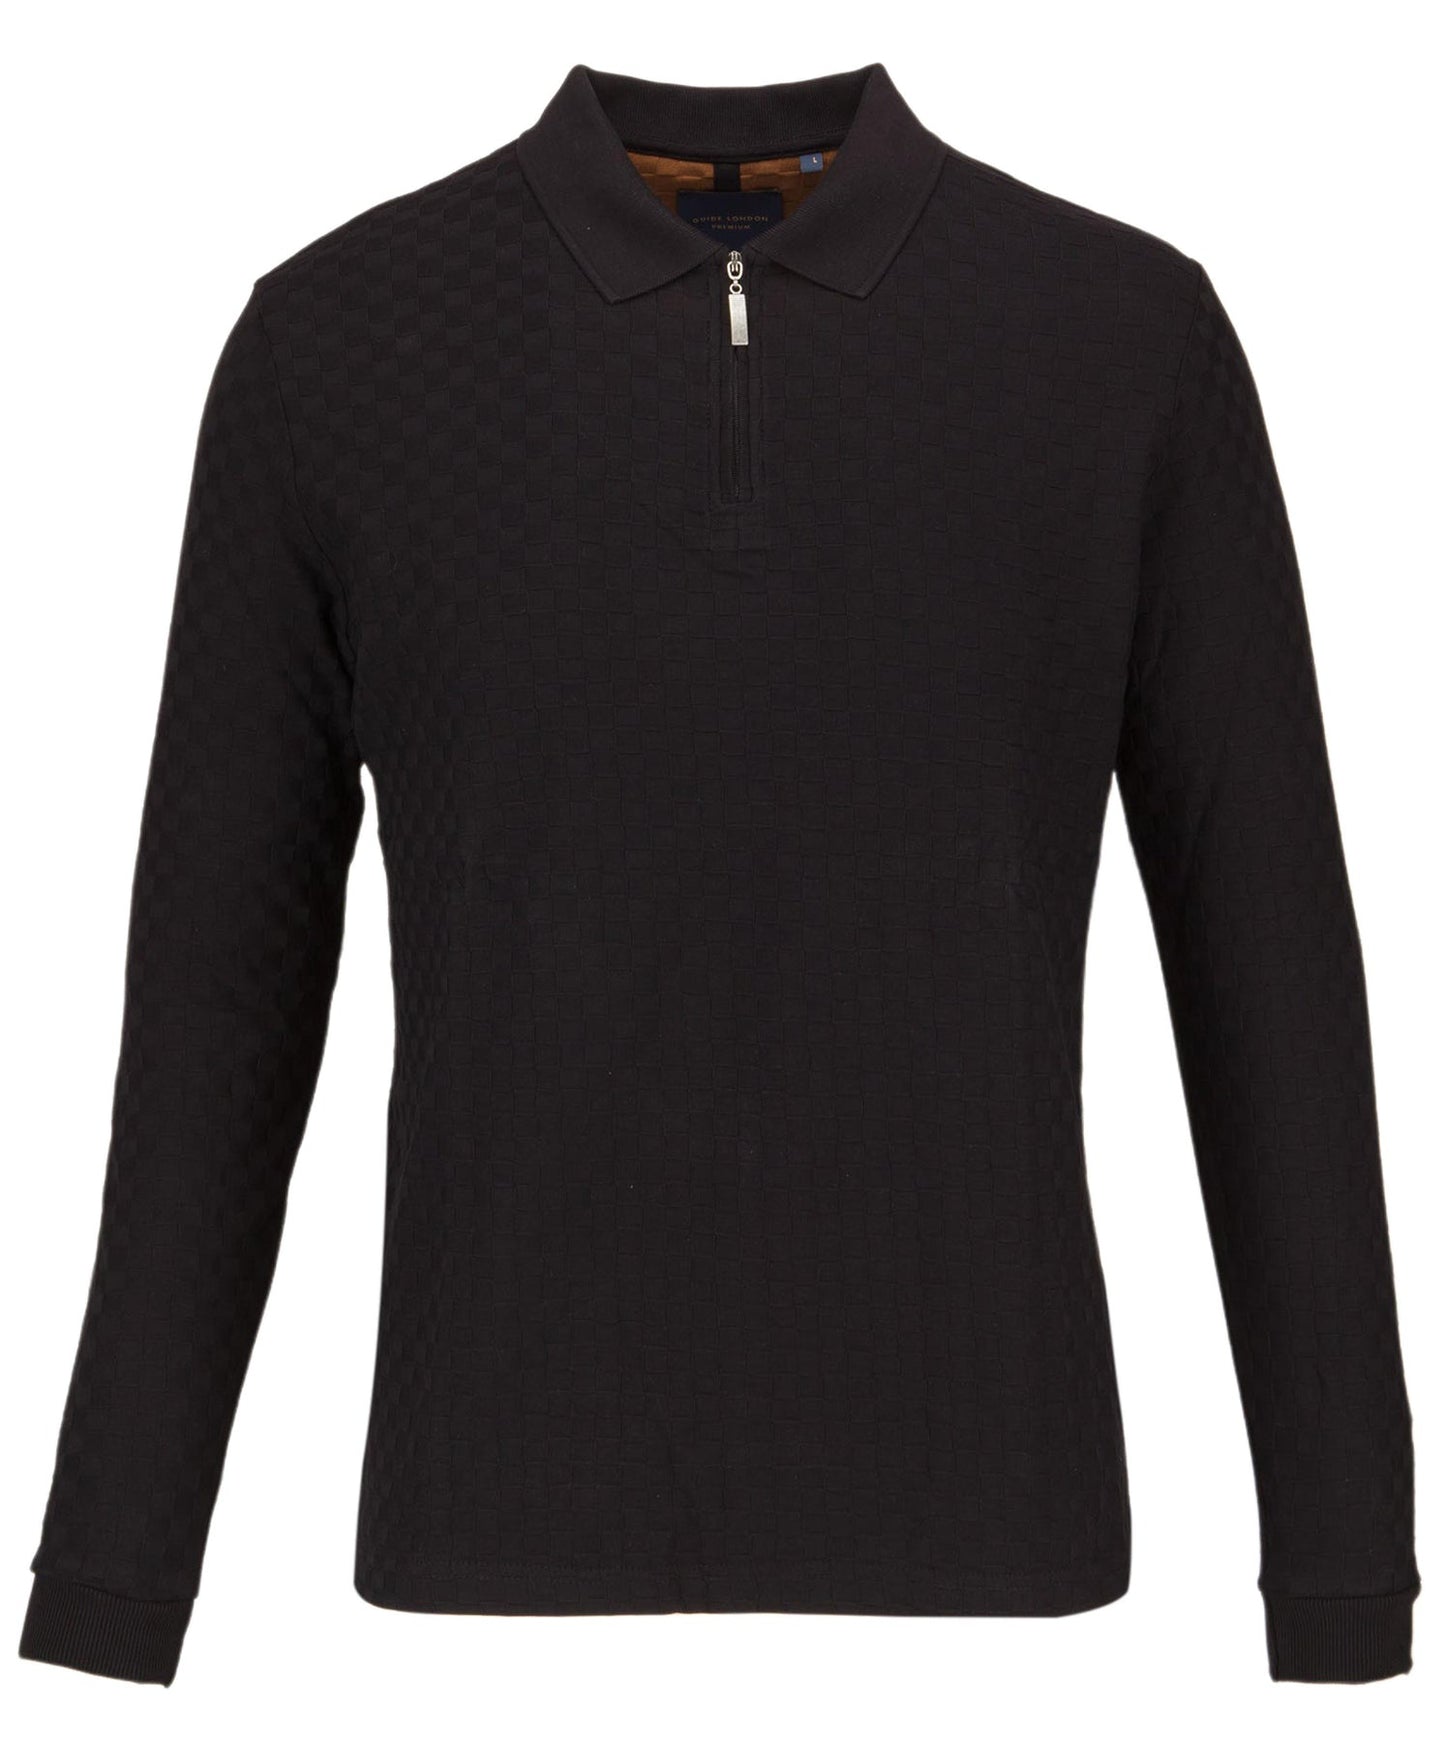 Guide London Long Sleeve Knitted Polo